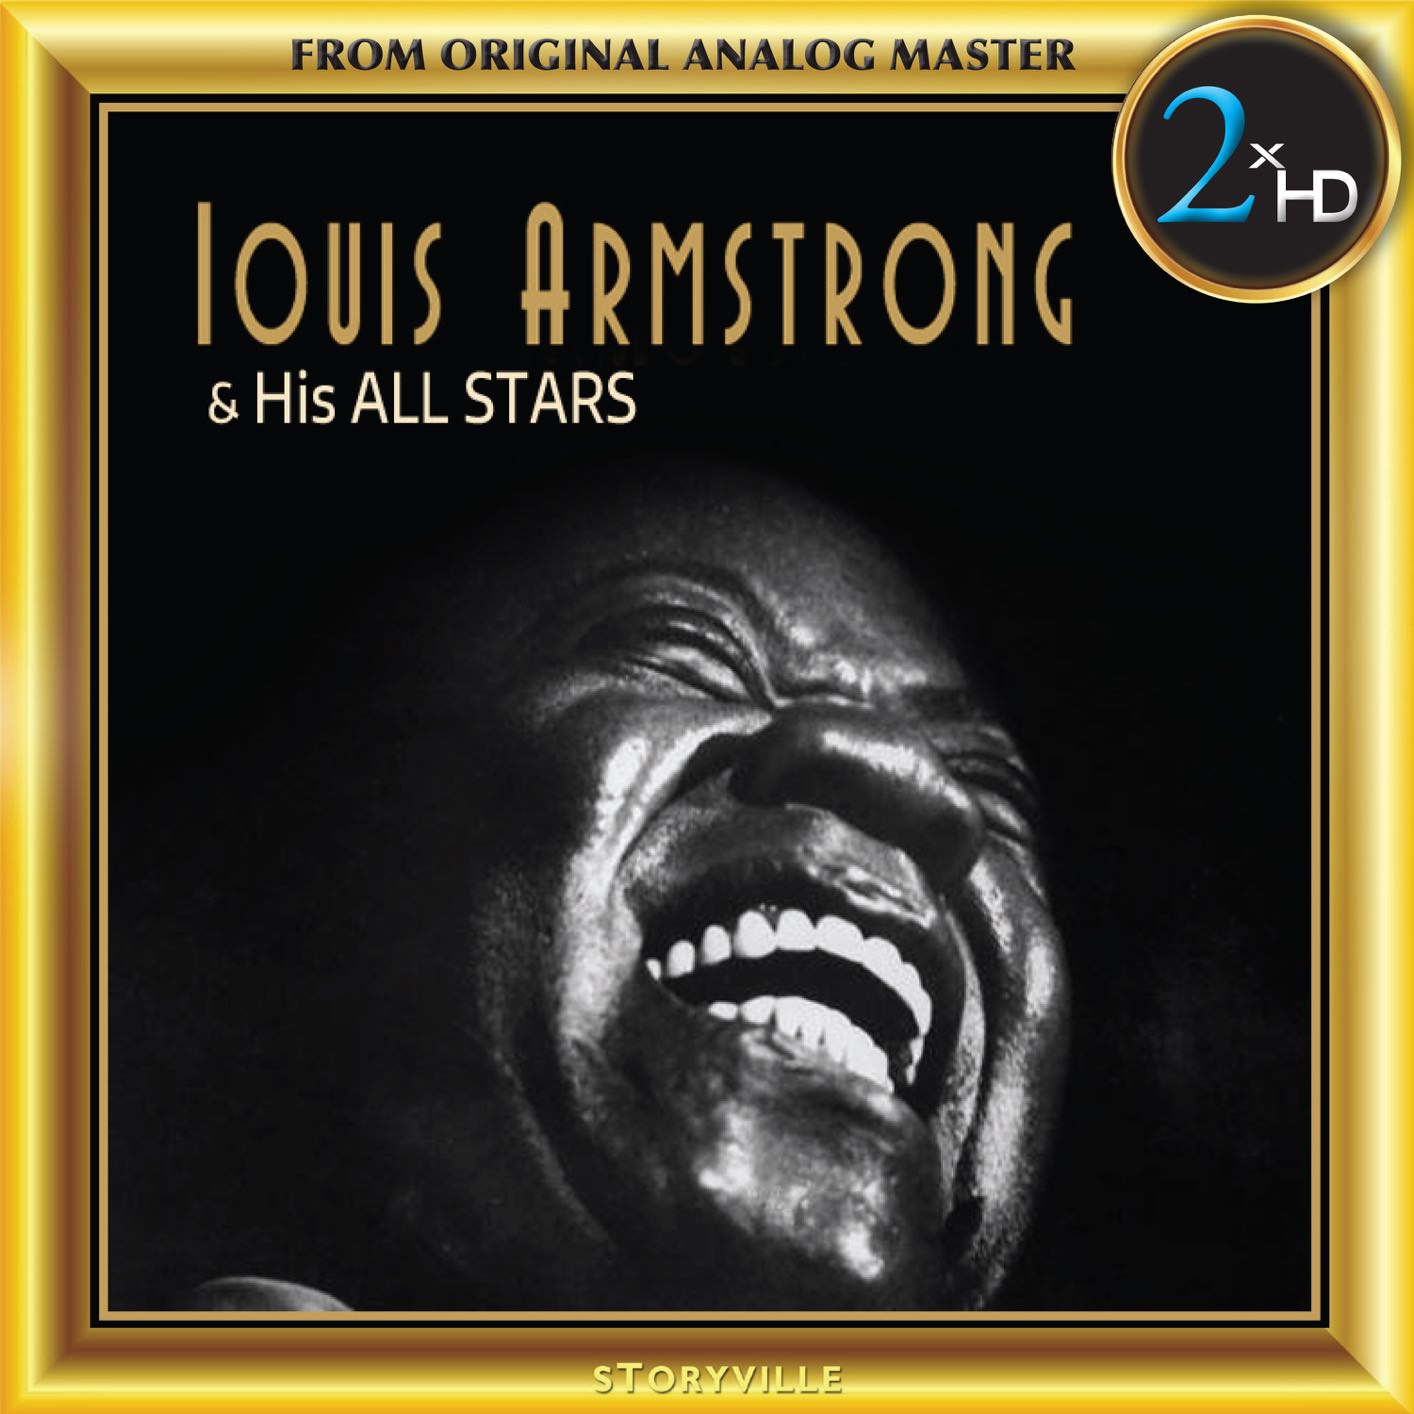 Louis Armstrong - Louis Armstrong & His All Stars (1954/2018) [FLAC 24bit/192kHz]